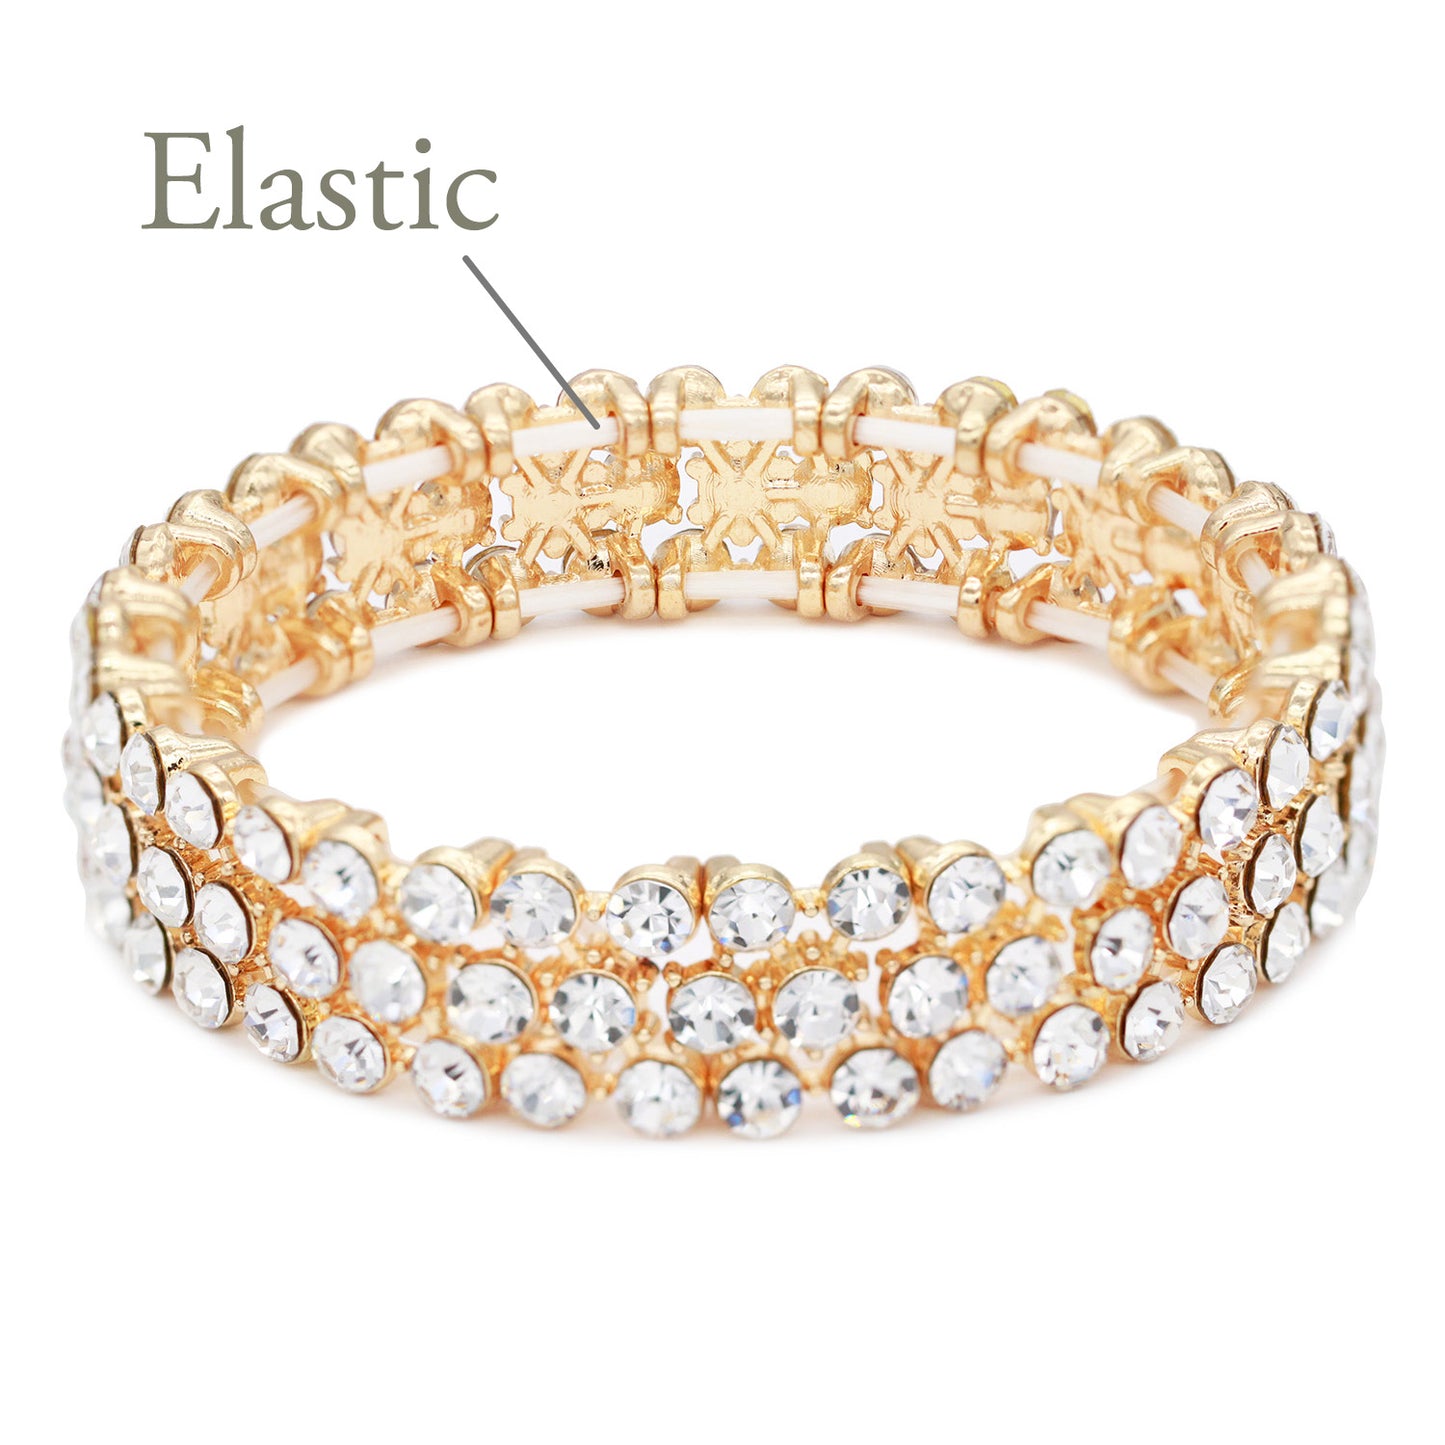 Lavencious Round Shape Rhinestones Thin 3 Rows Elastic Stretch Bracelet Party Jewelry for Women 7"(Gold Clear)